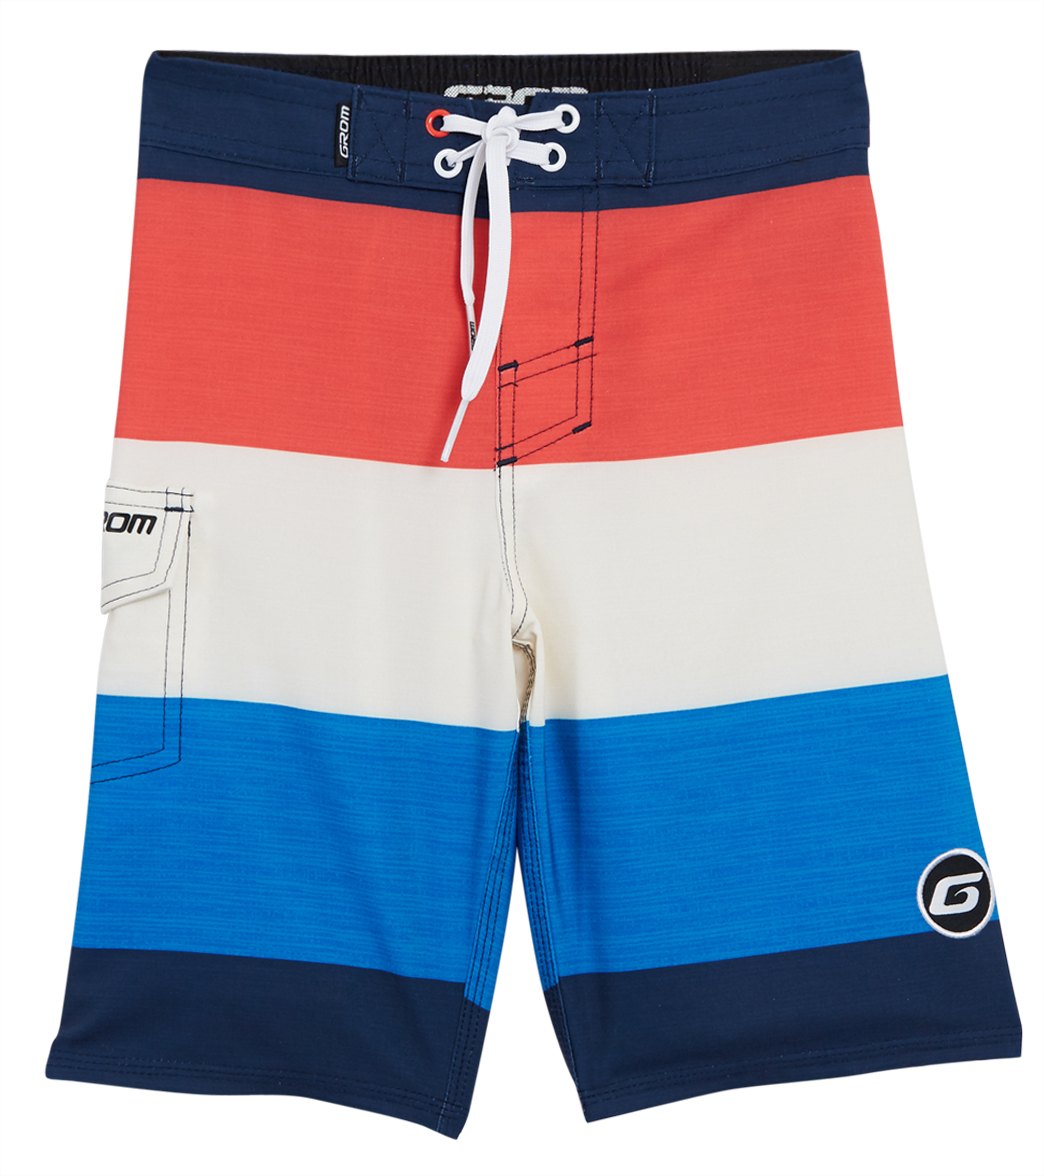 Grom Boys' Scrimmage Board Short - Navy Small - Swimoutlet.com